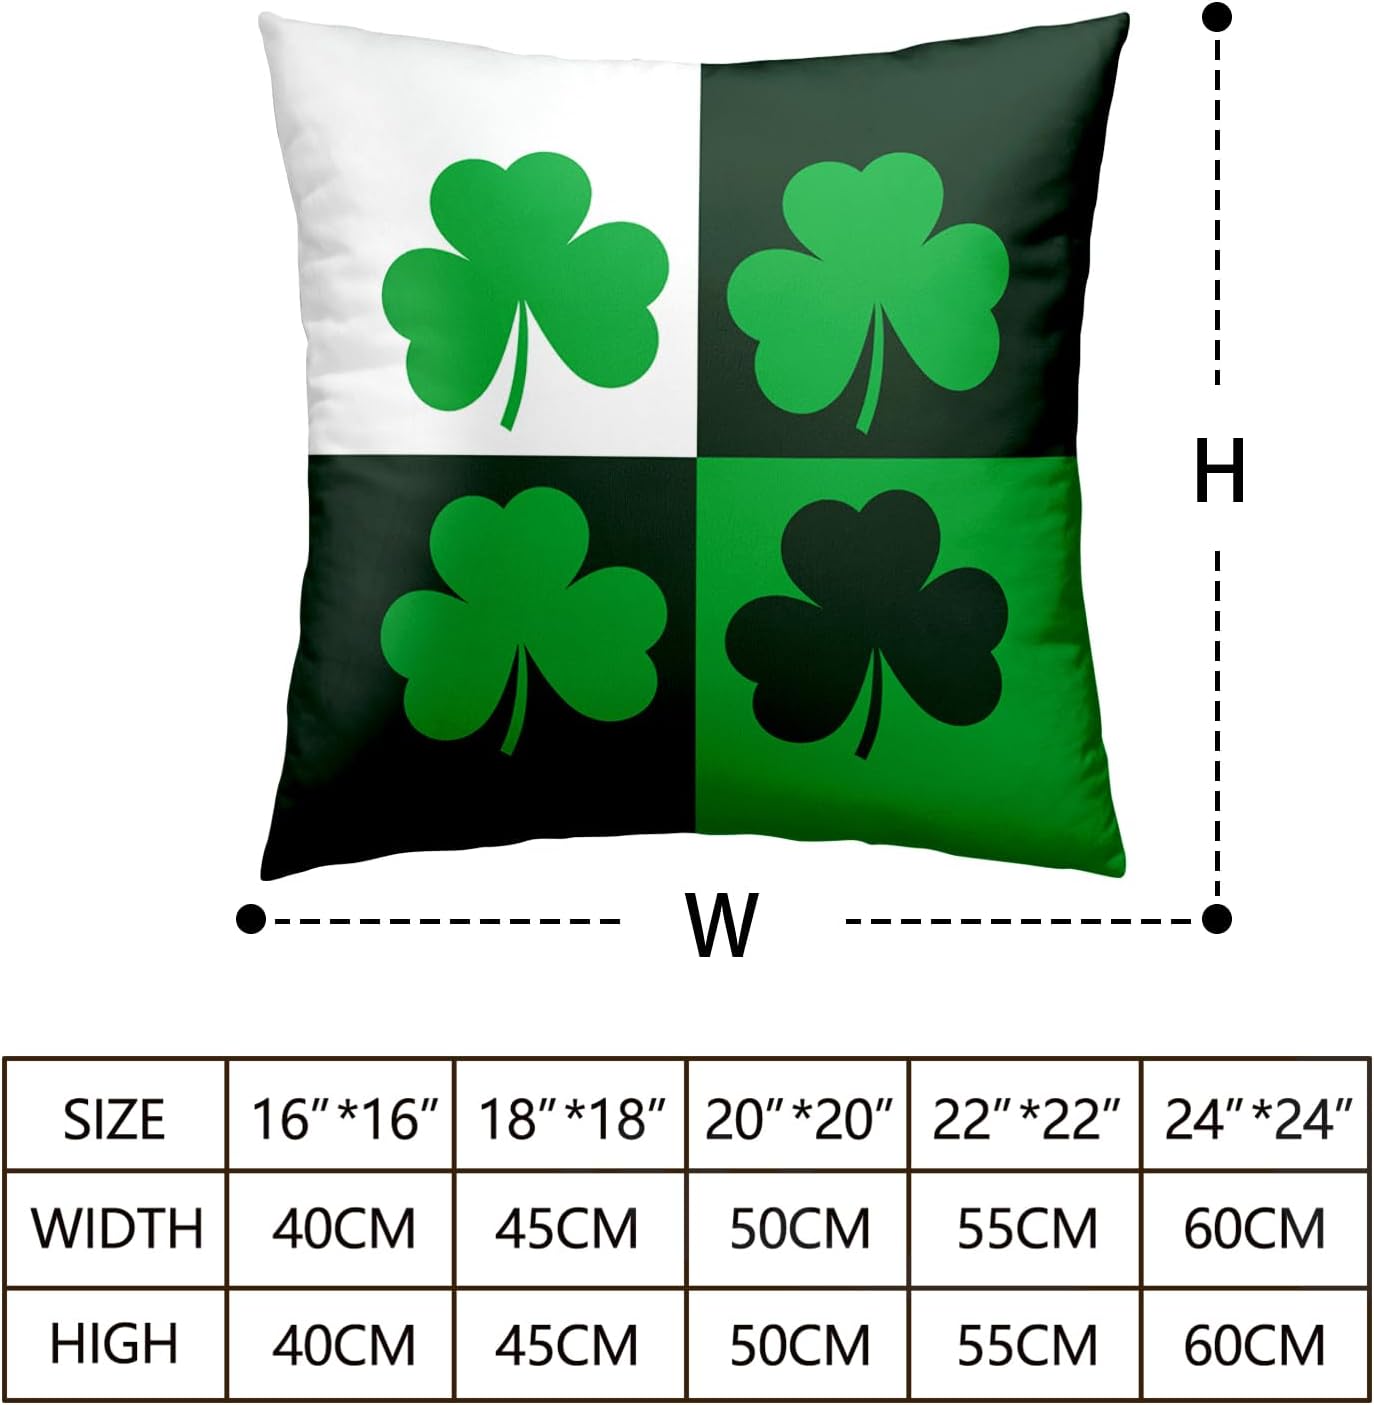 Kcozydecor St. Patrick's Day Pillow Covers 16x16 Green Shamrock Pillows Cases Black and White Pillow Covers St Patrick S Day Decor for Indoors Couch Bed Living Room in 2 Pcs